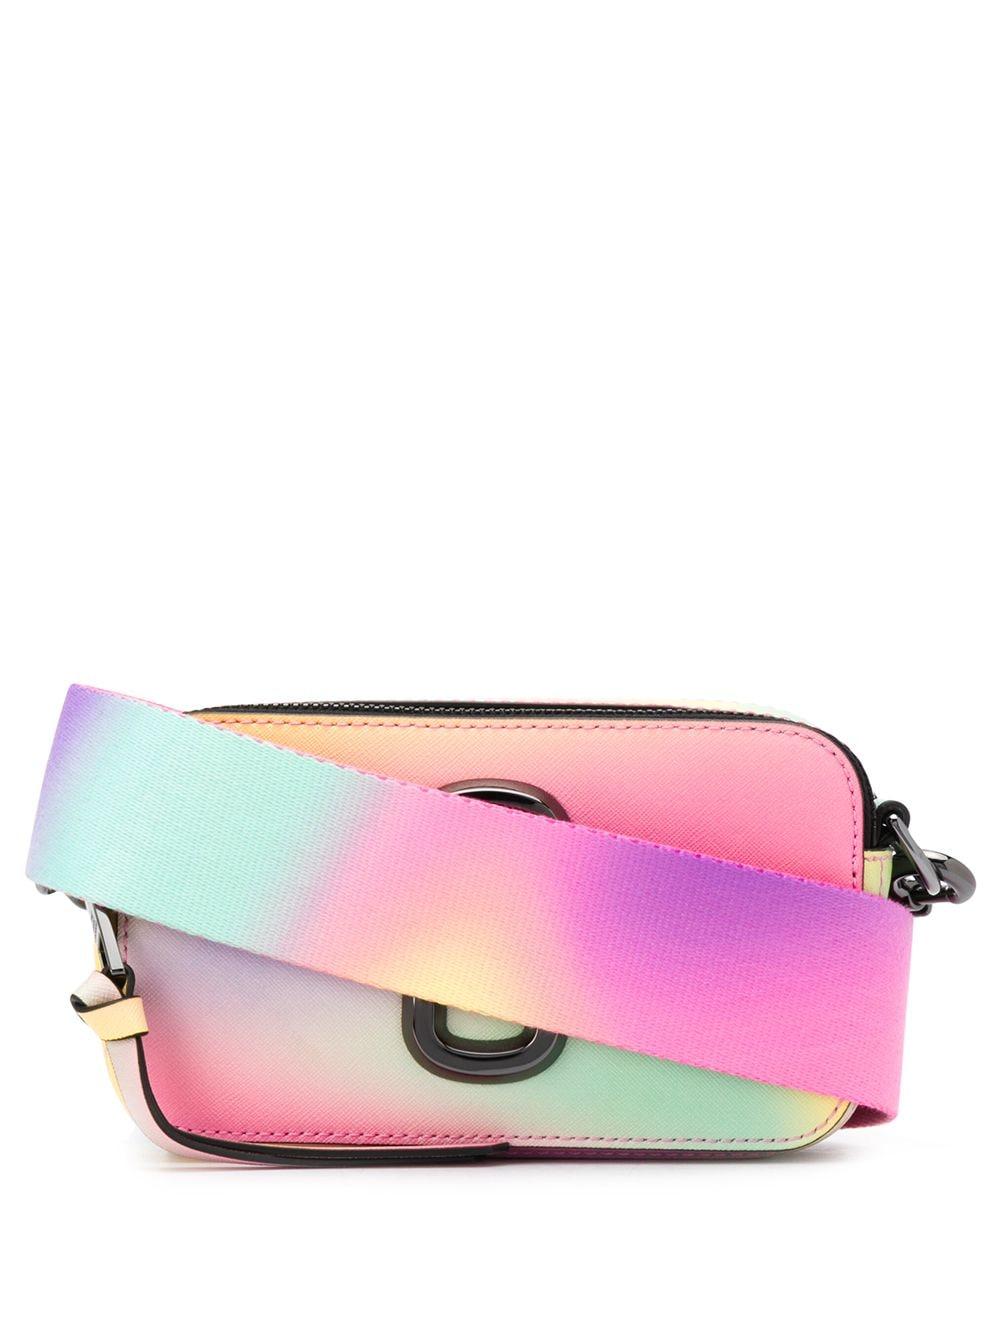 Marc Jacobs The Snapshot Airbrush Bag in Pink | Lyst